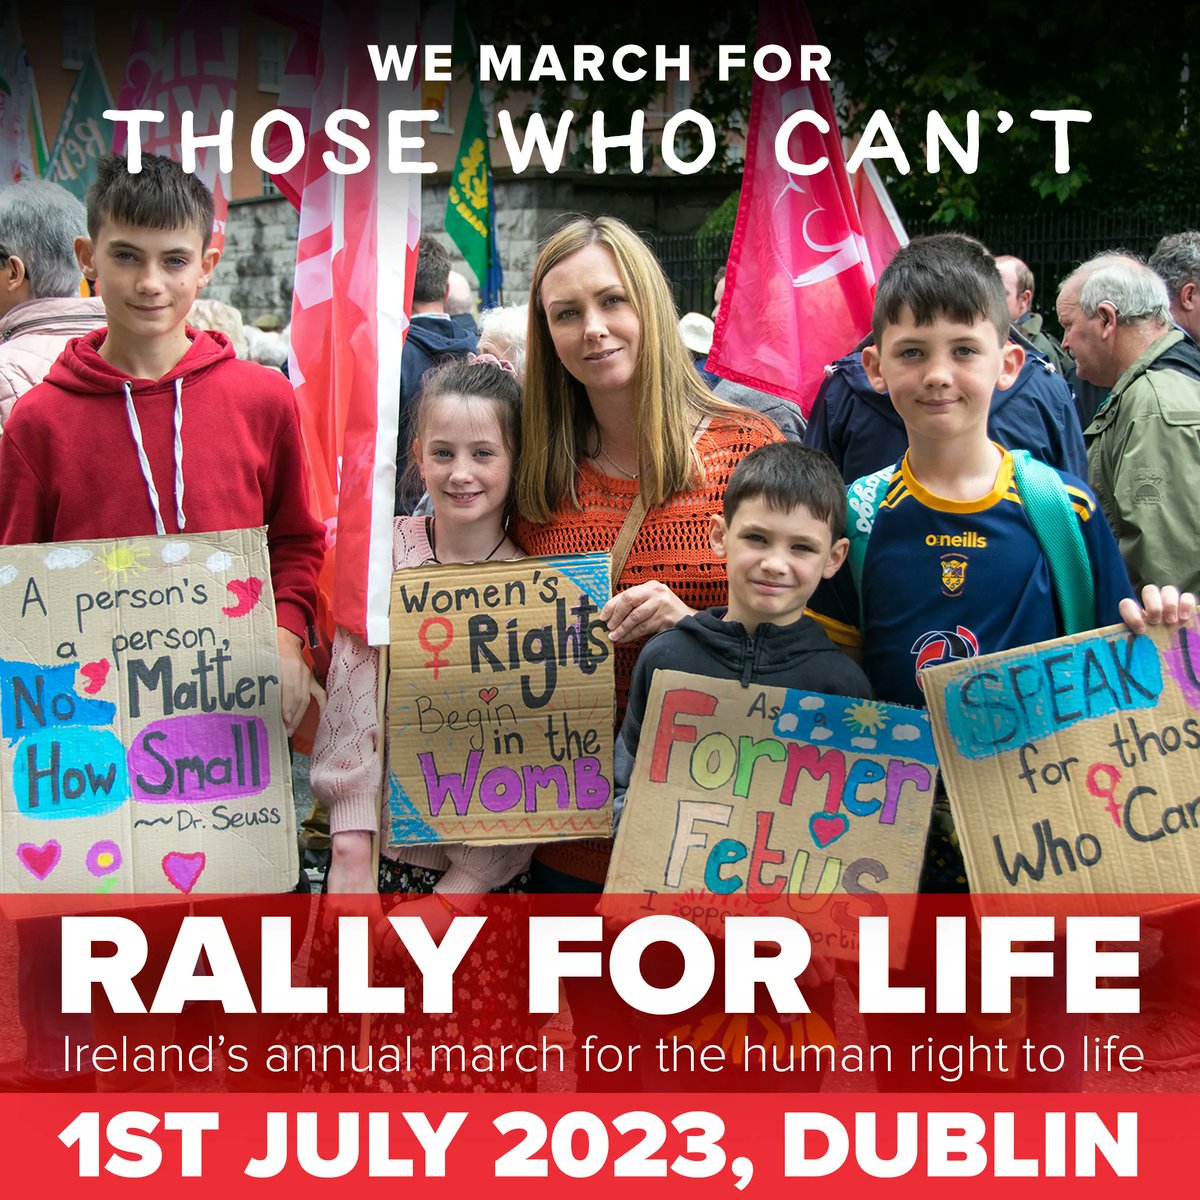 Make sure you join the All Ireland Rally for Life and march for those who can't!

SAVE the DATE for Saturday 1st July at 1pm meeting at Parnell Square, Dublin!

#StopAbortingOurFuture #RallyforLife #WhyWeMarch